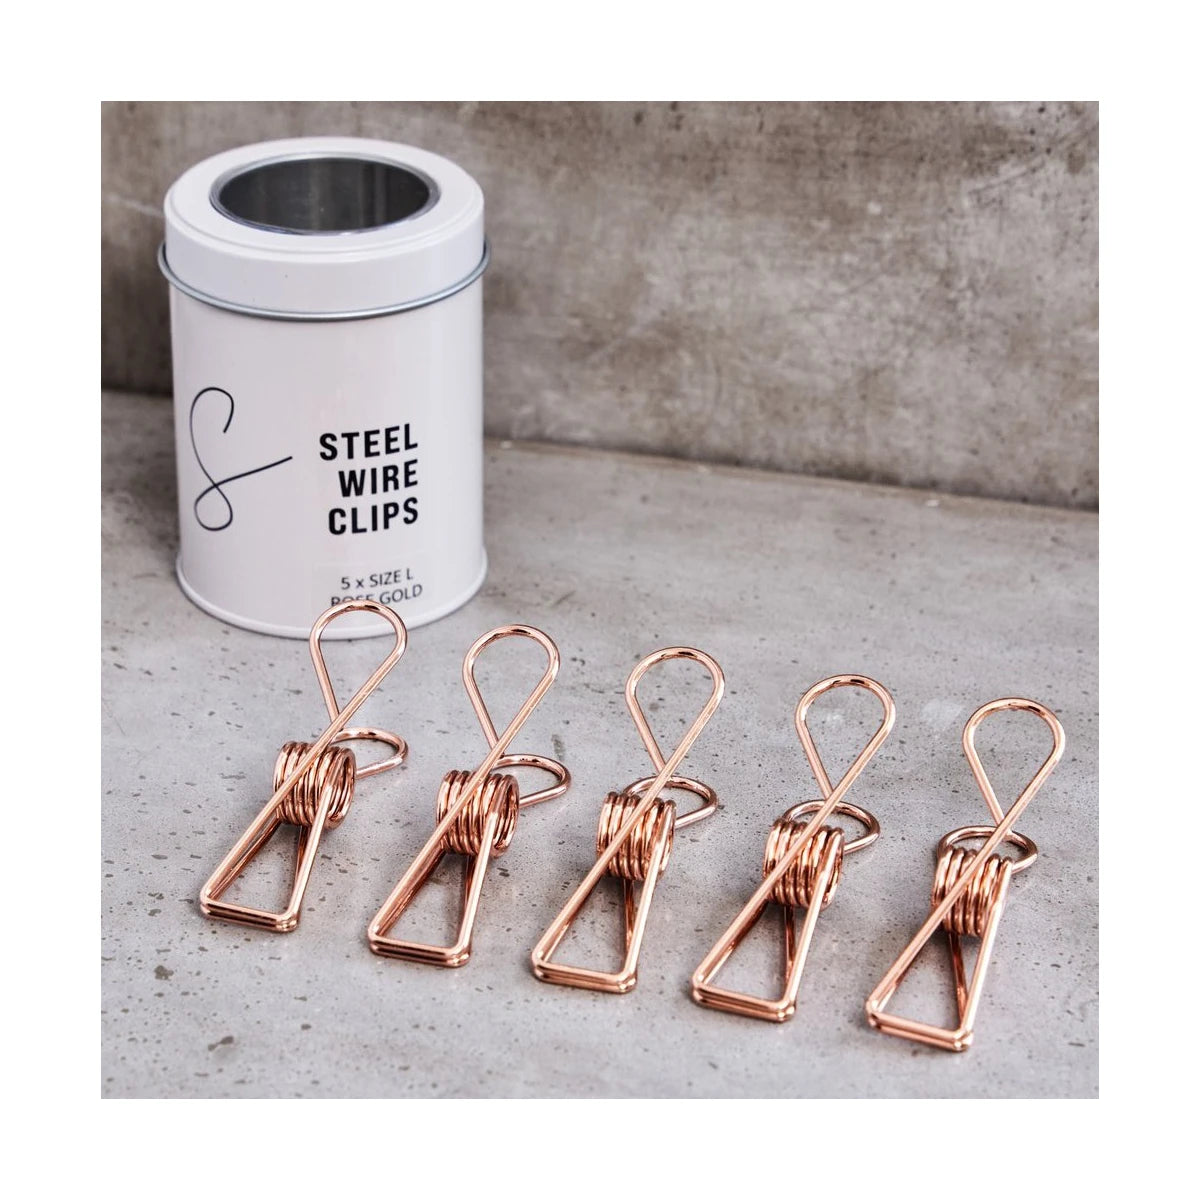 STEEL WIRE CLIPS BIG (5 pcs.) rose gold